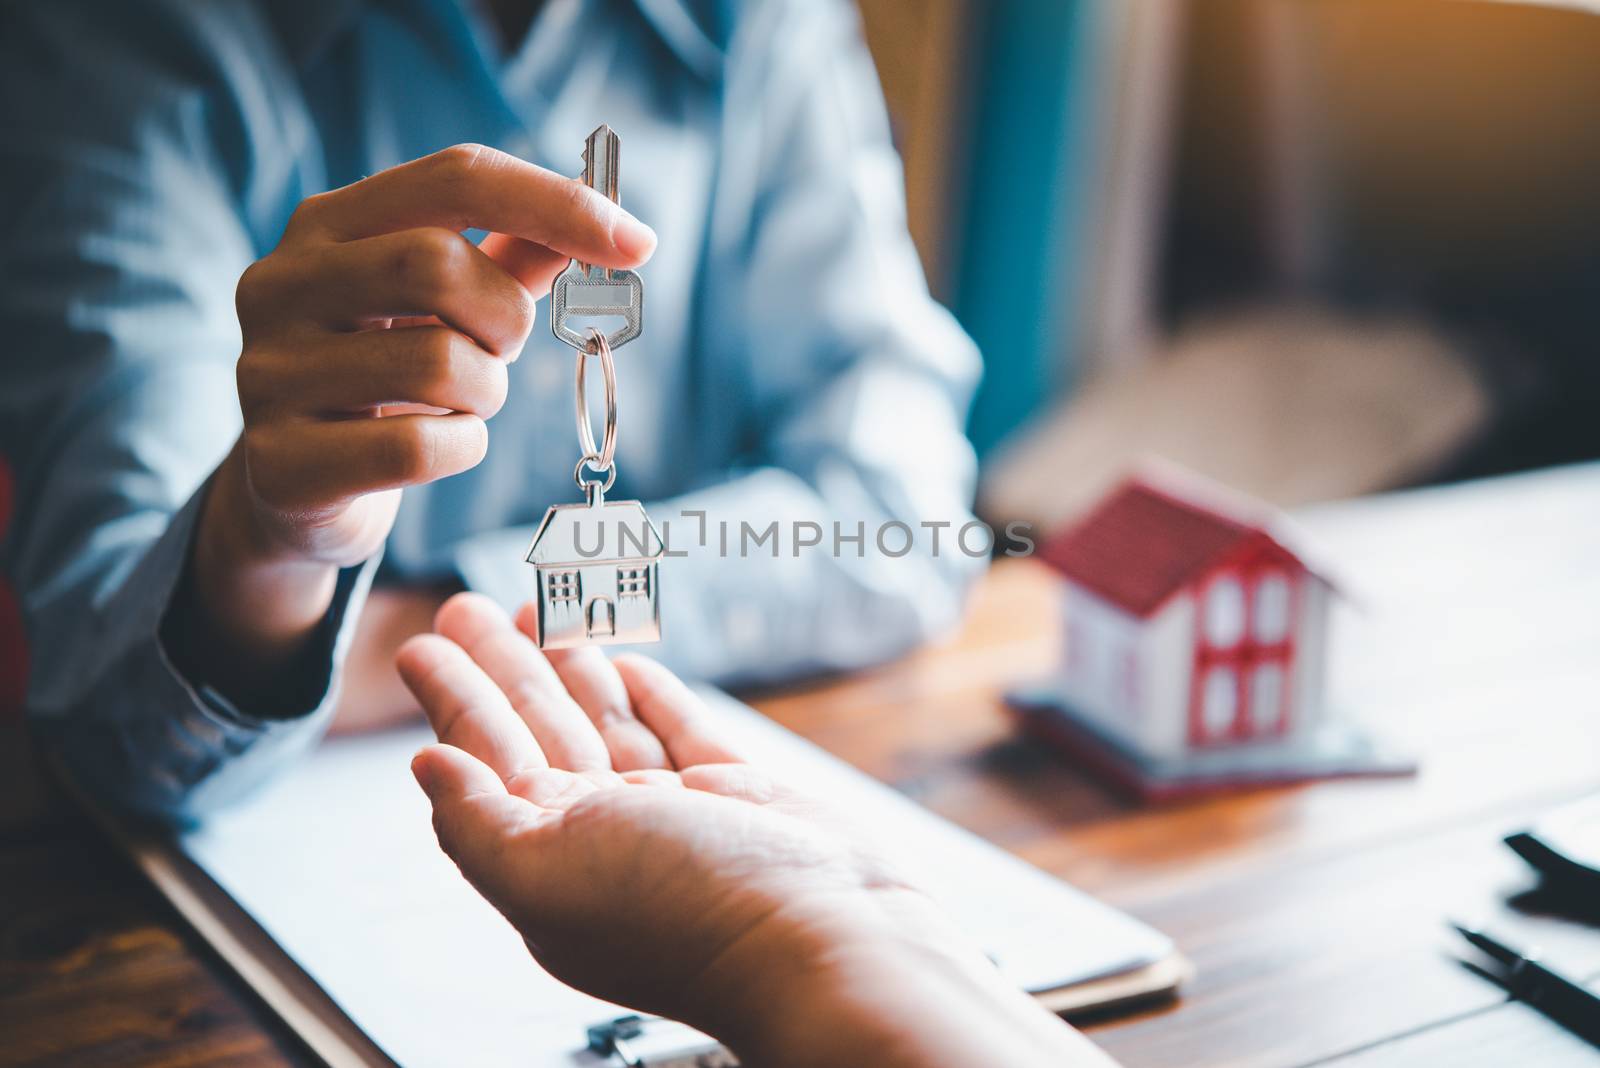 real estate agent gives the keys to the house buyer and signs the contract in the office.